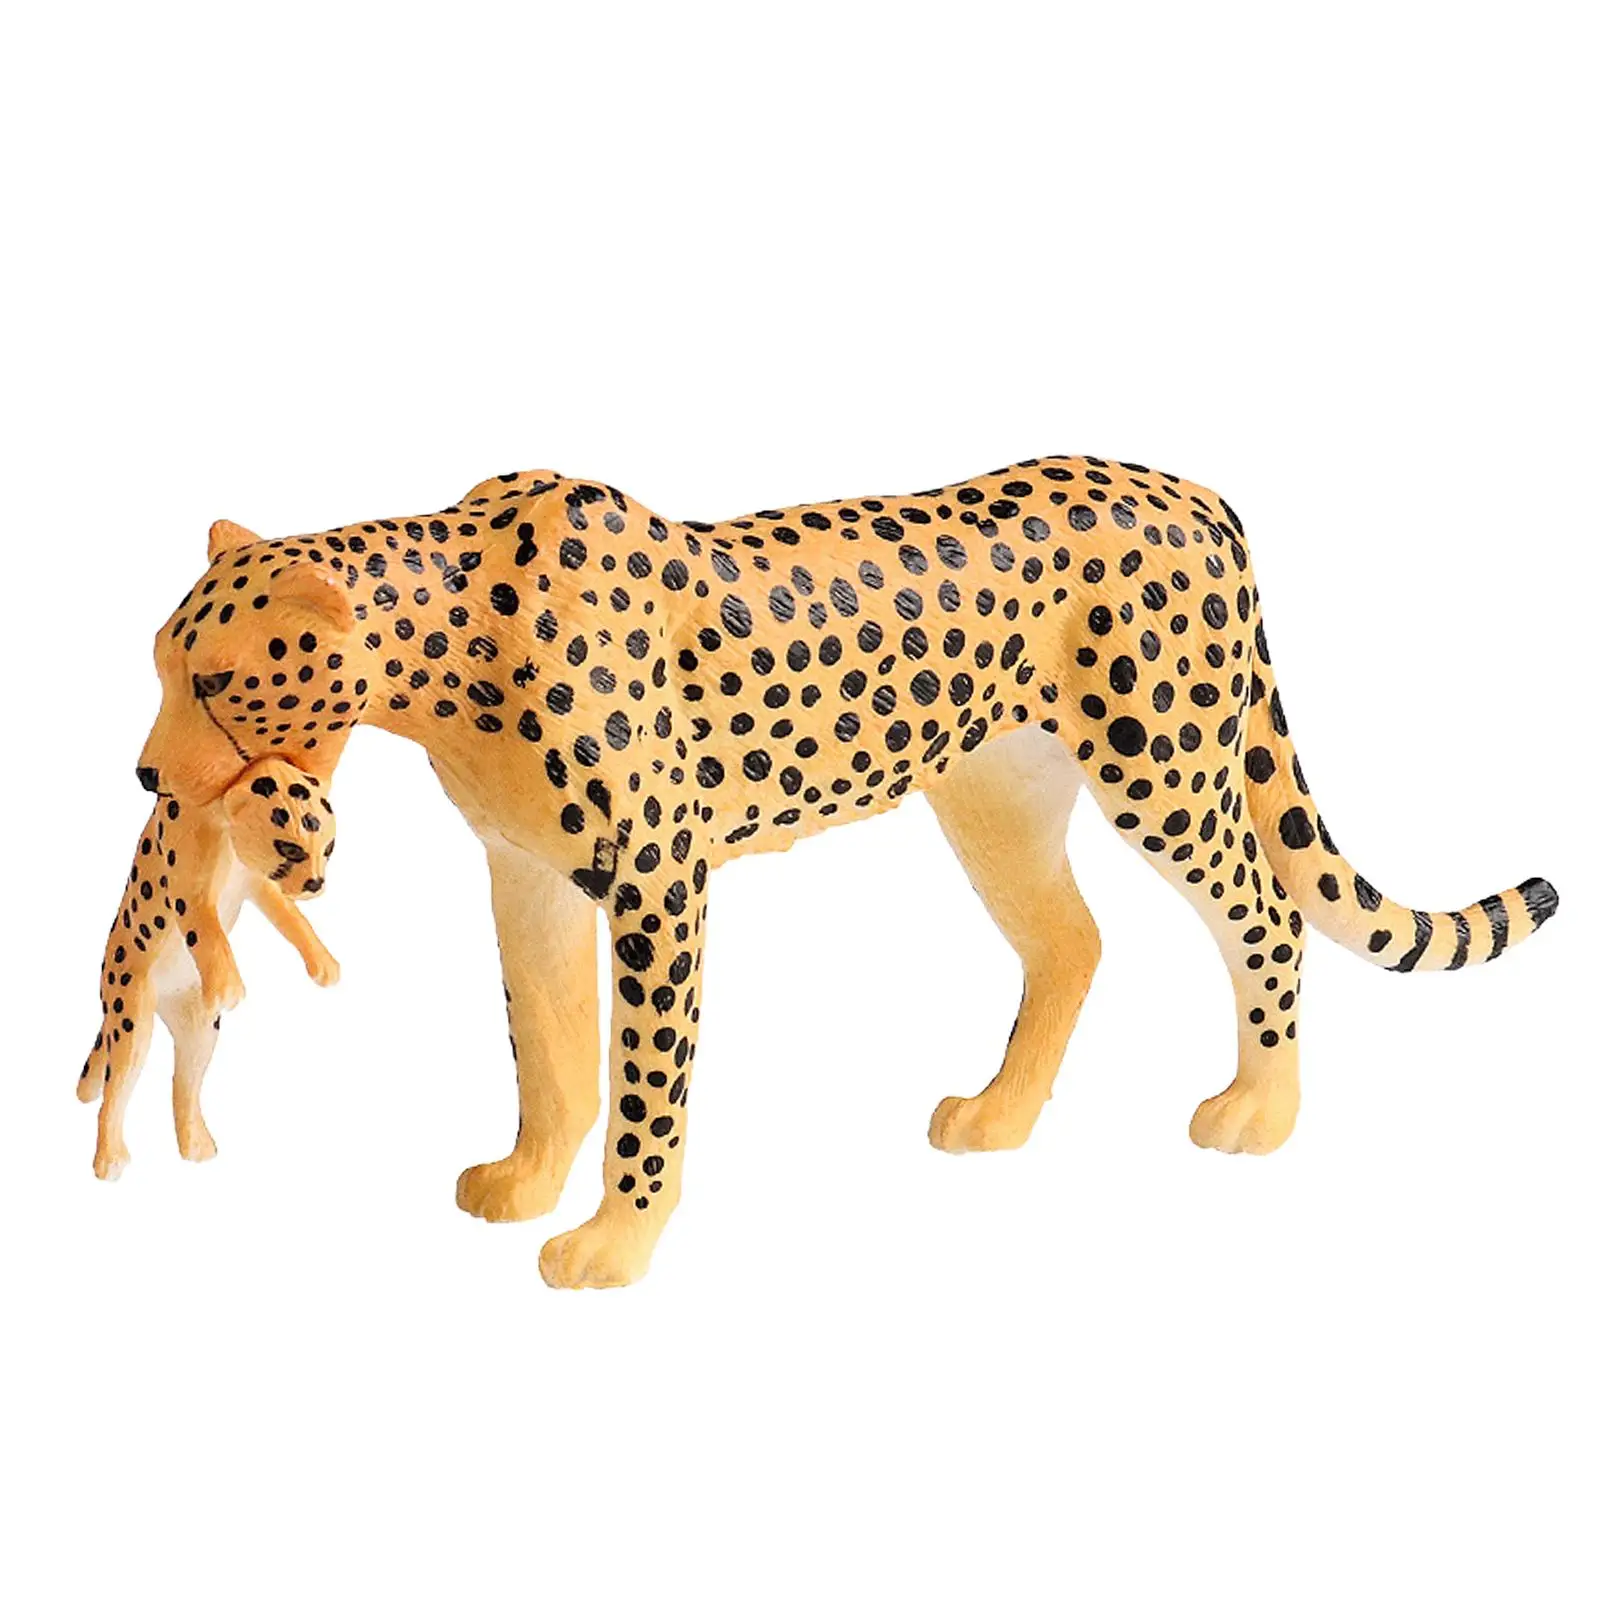 Leopard Toy Figurine Preschool Leopard Figures for Cake Topper Holiday Gift